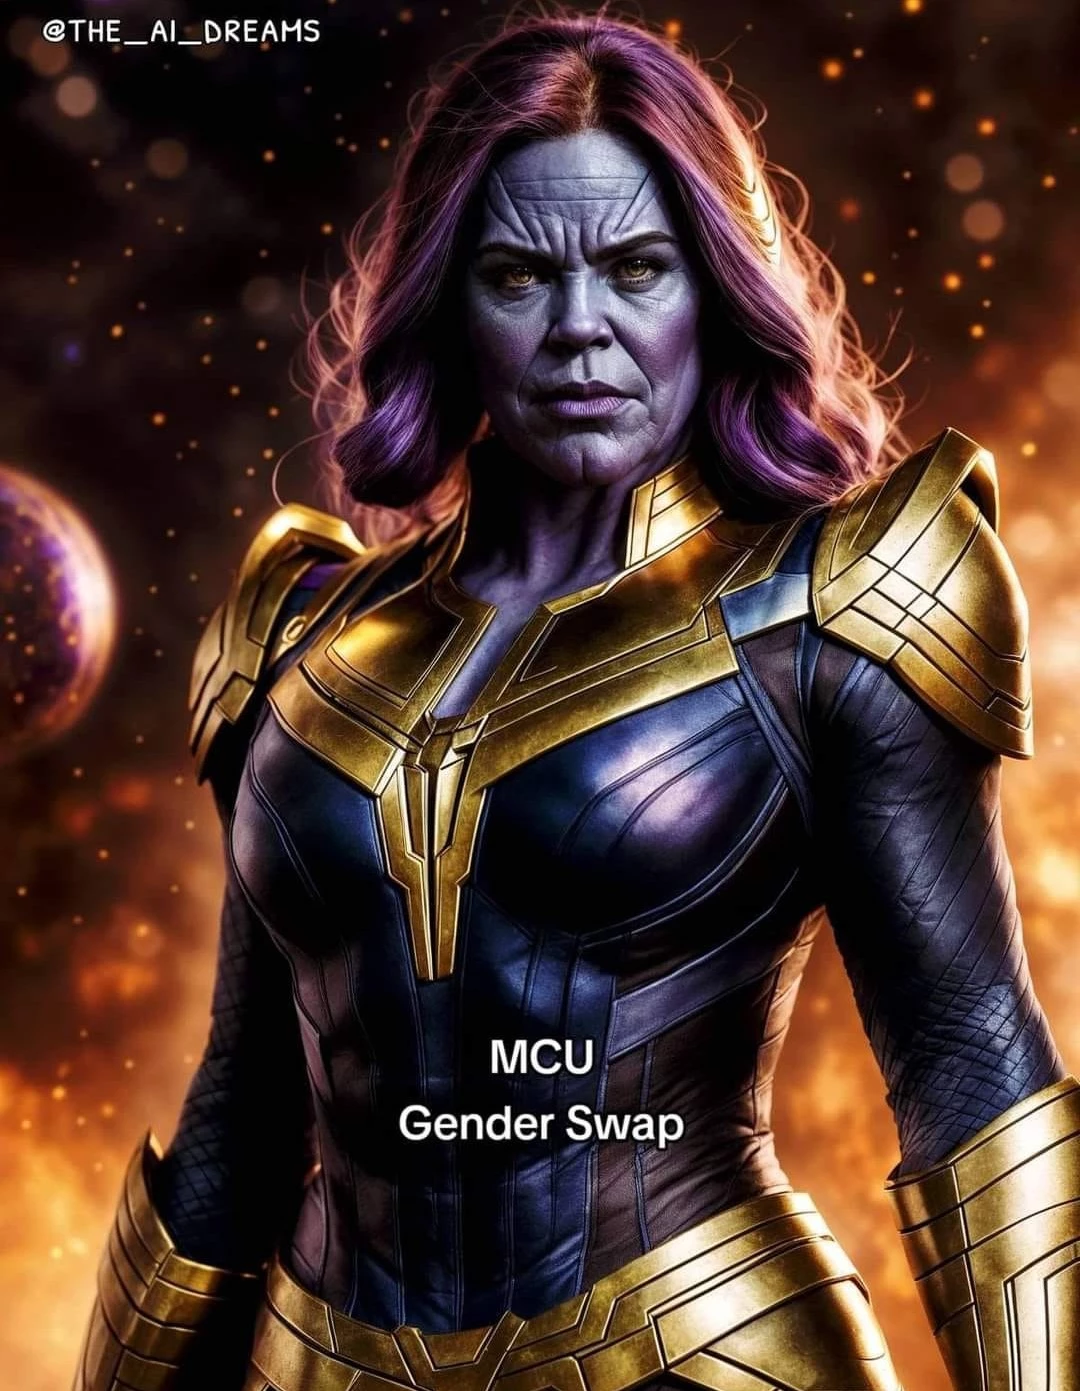 Female Thanos Looks Like That One School Principal Who Always Penalize Her Students